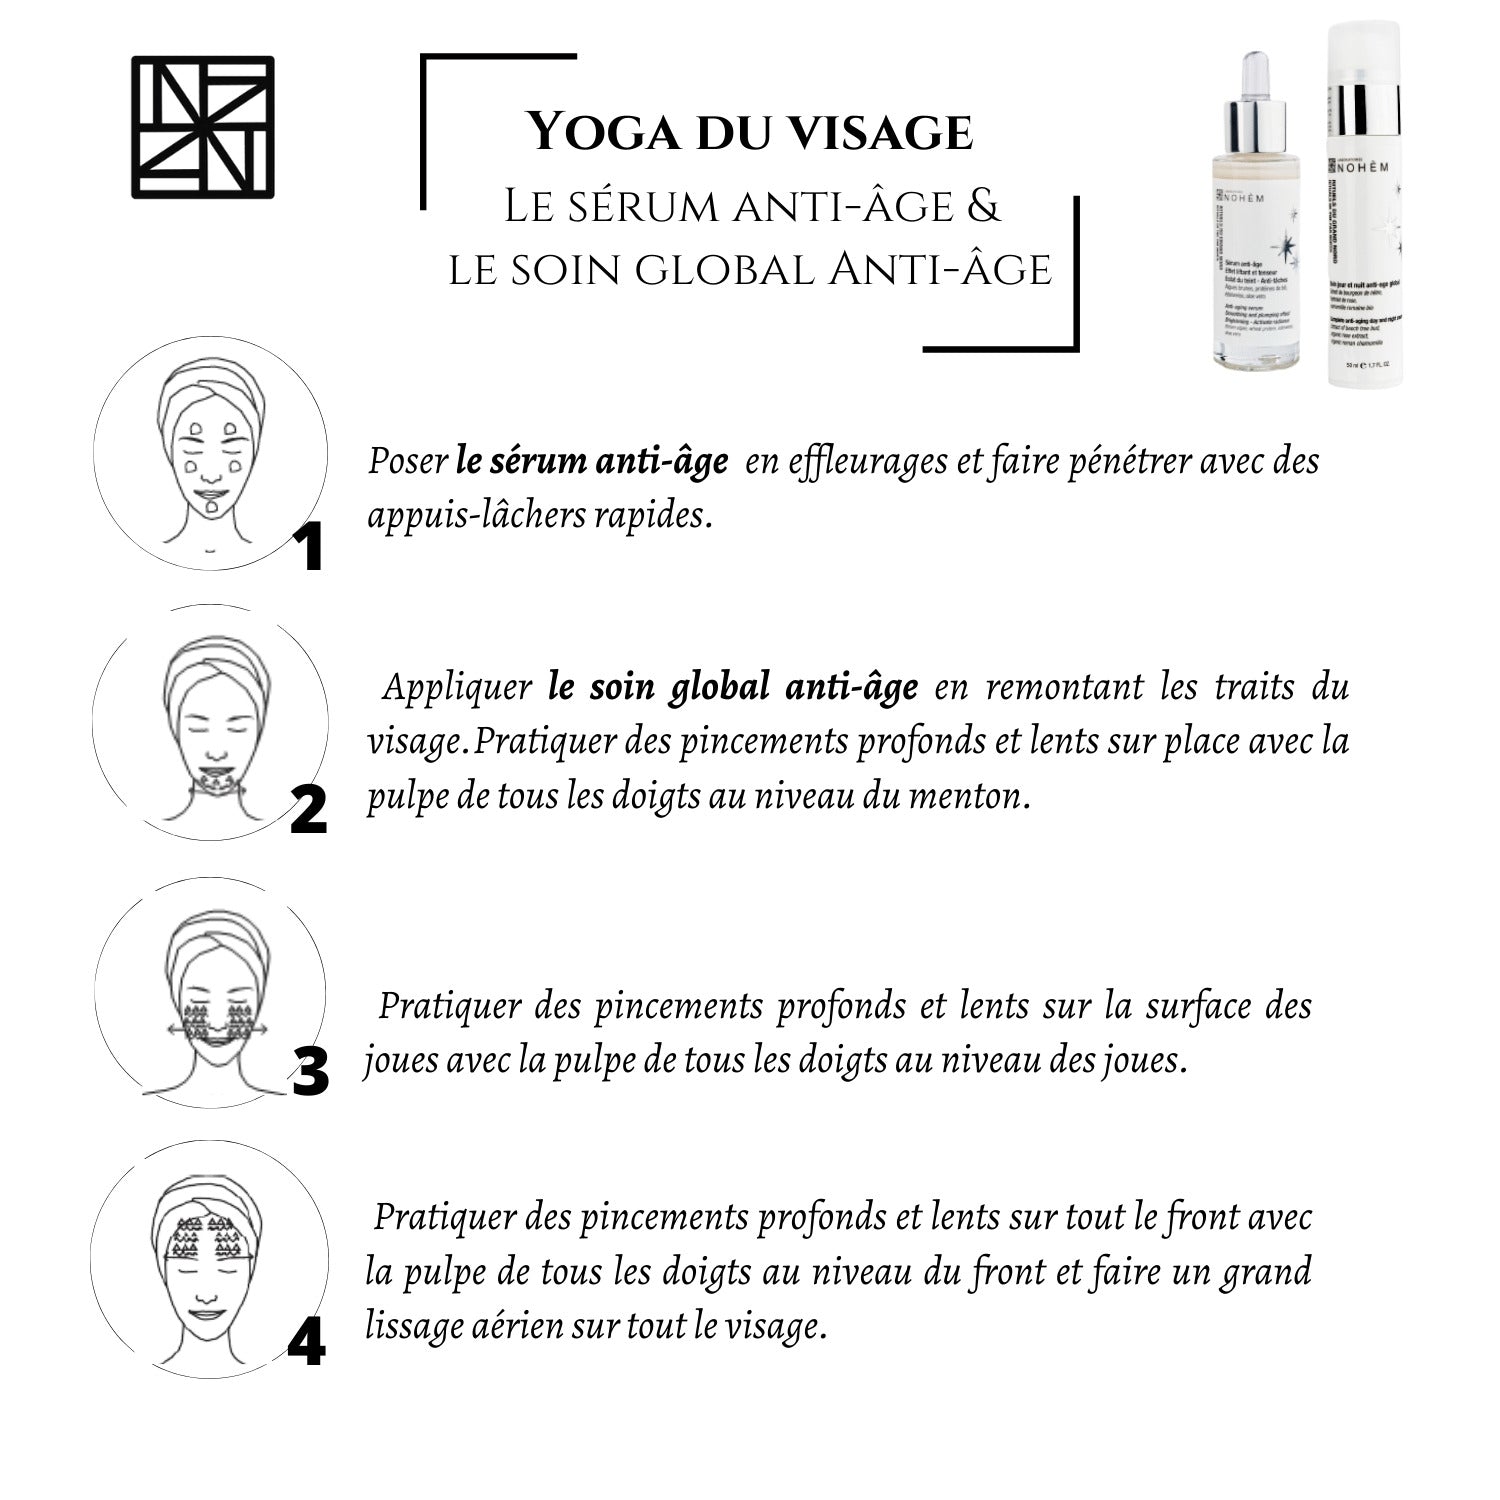 Global anti-aging face and neck treatment